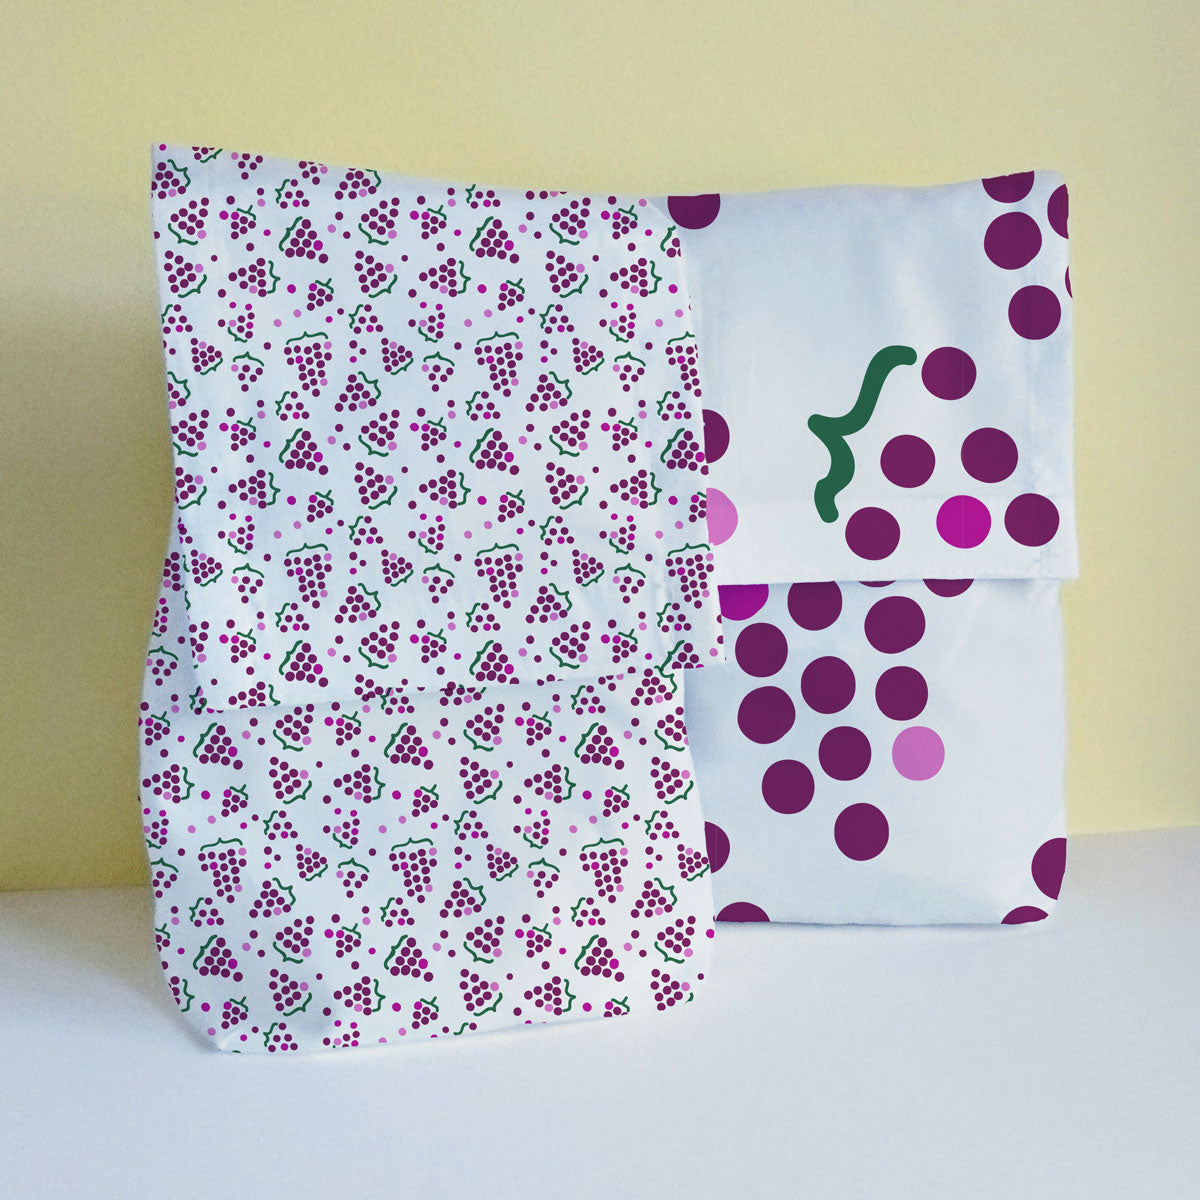 Five Patch Design grapes lunch bags